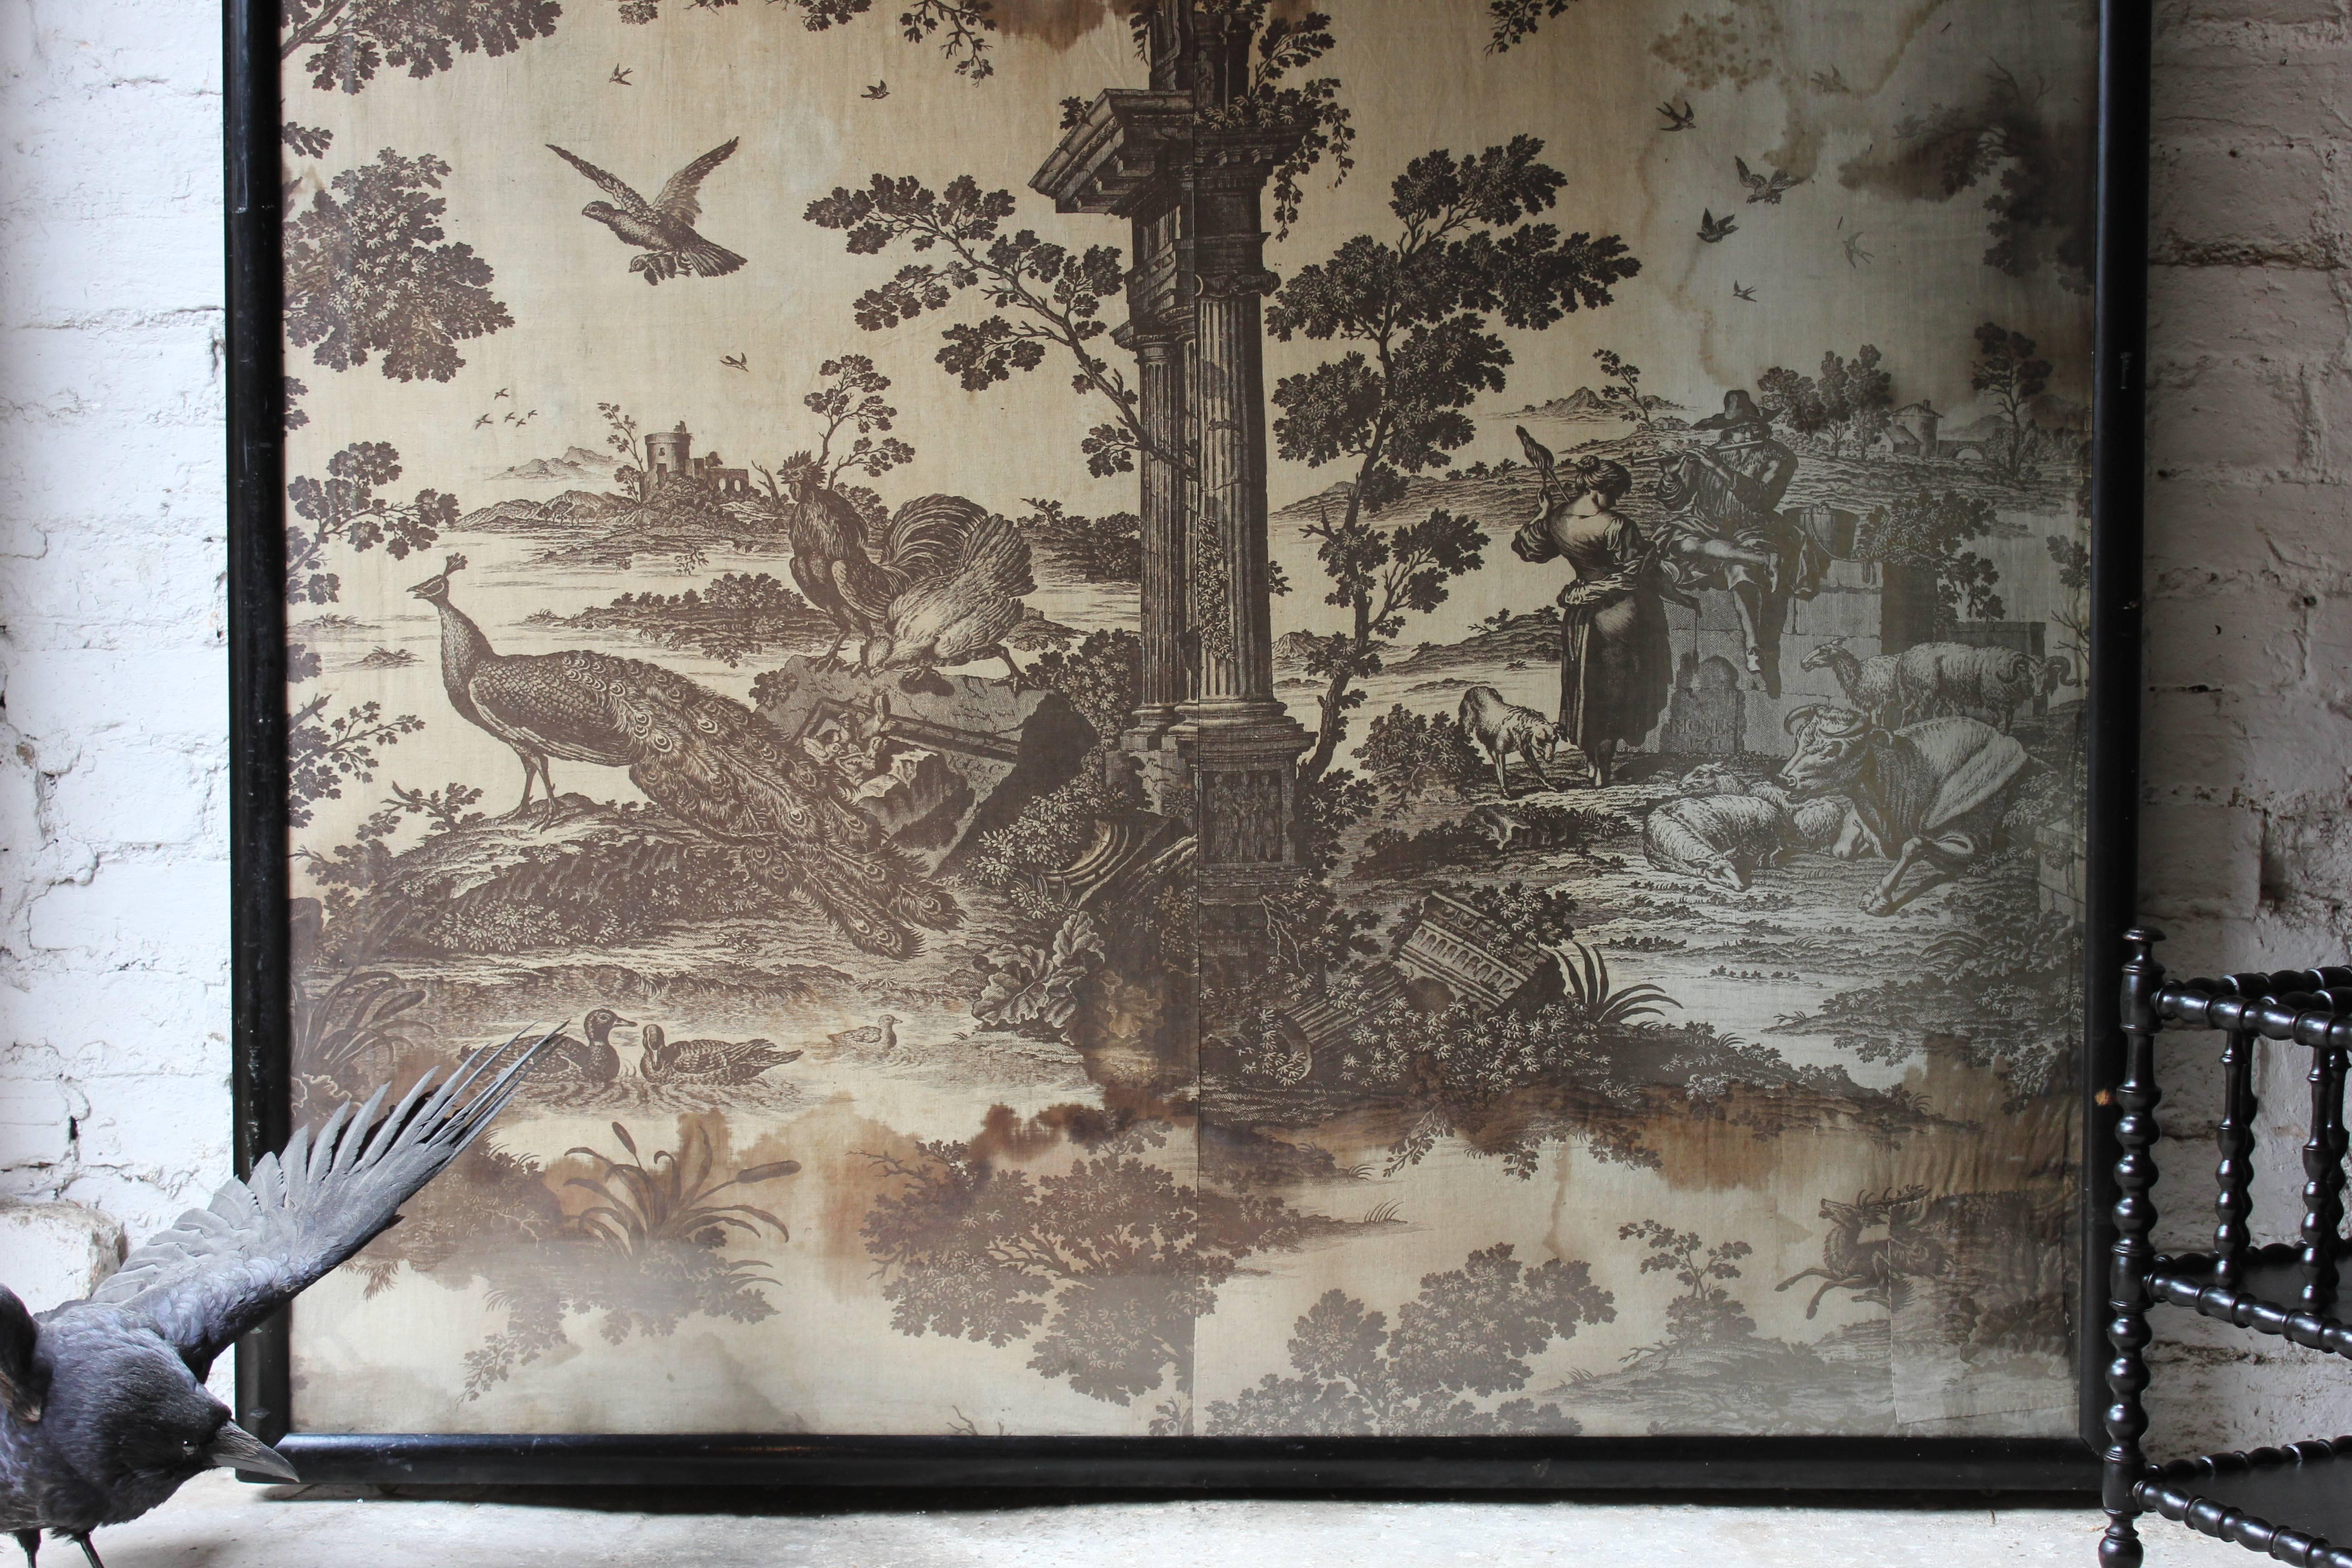 Cotton Large Framed Mid-18thC Section of 'Toiles de Jouy' Wall Covering; 'The Old Ford'